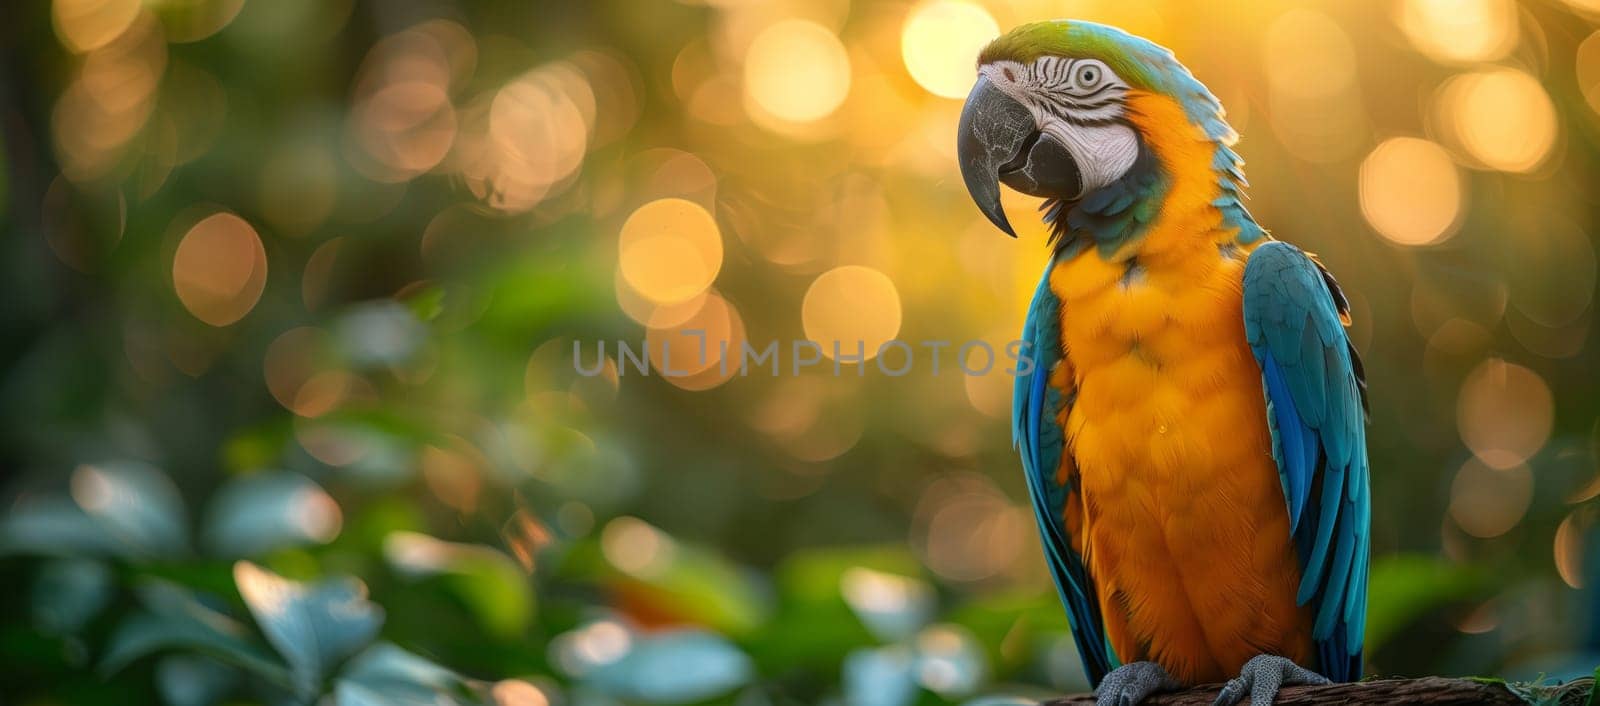 Colorful parrot with bright feathers perched on jungle branch by richwolf